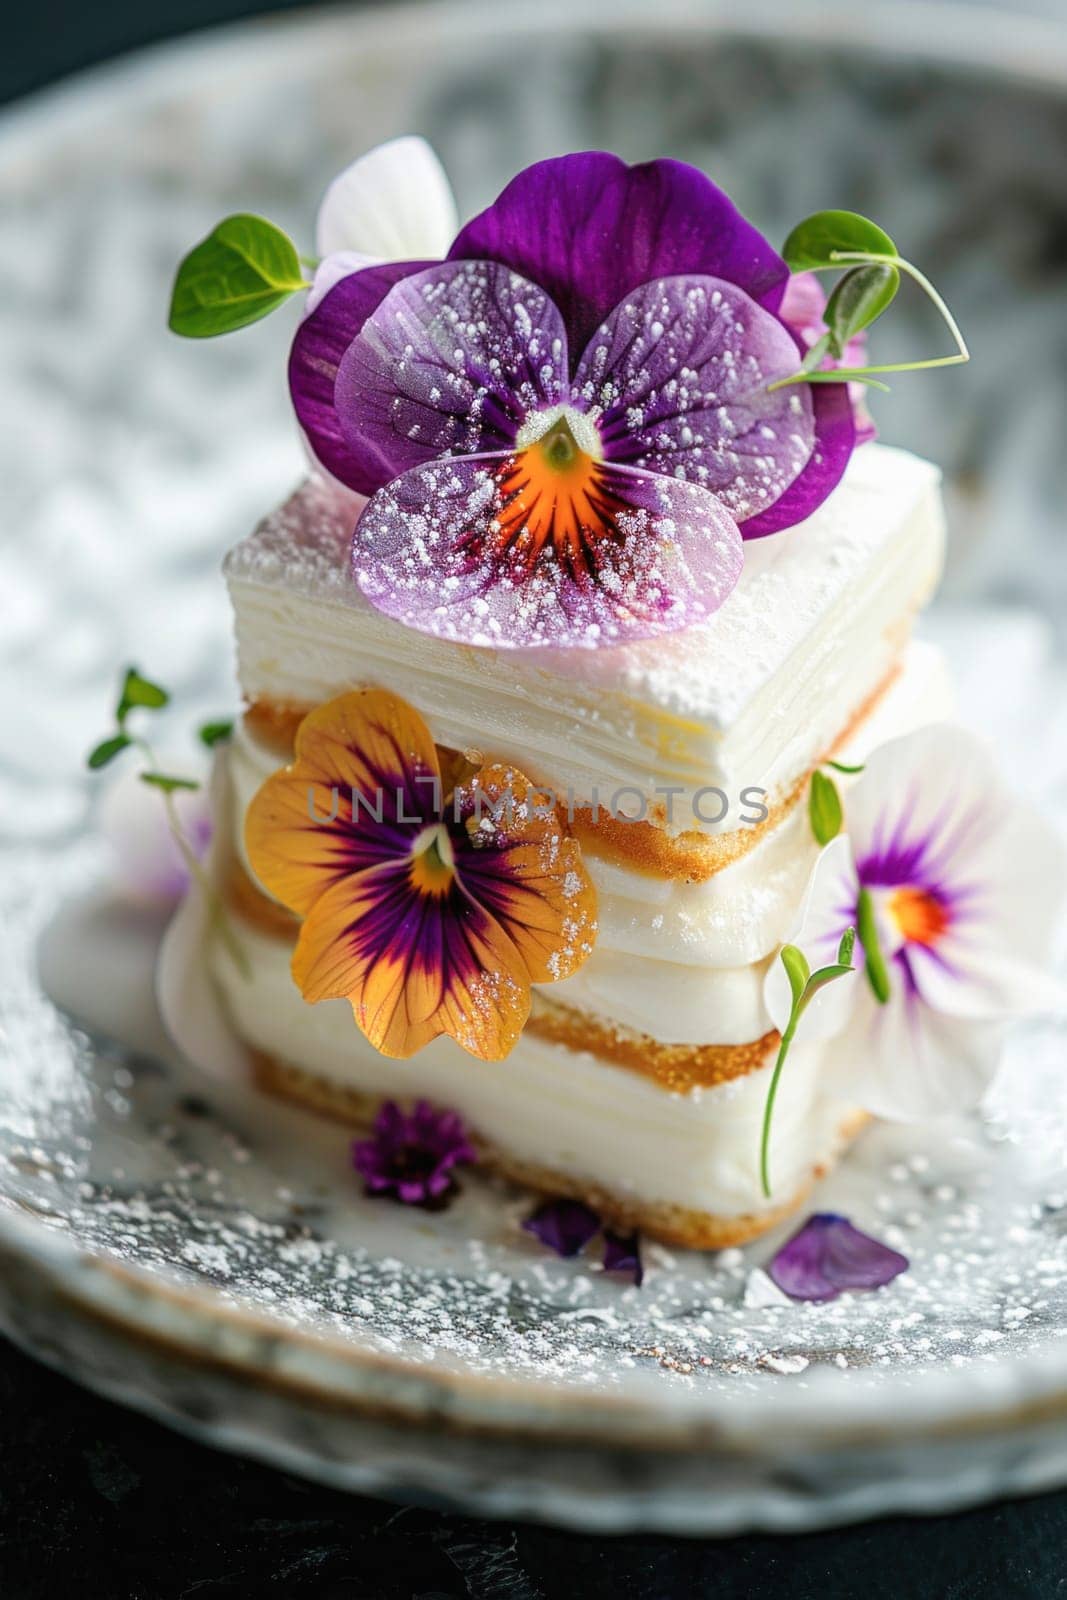 A beautifully decorated cake with delicate purple flowers sits on a plate, showcasing its intricate design